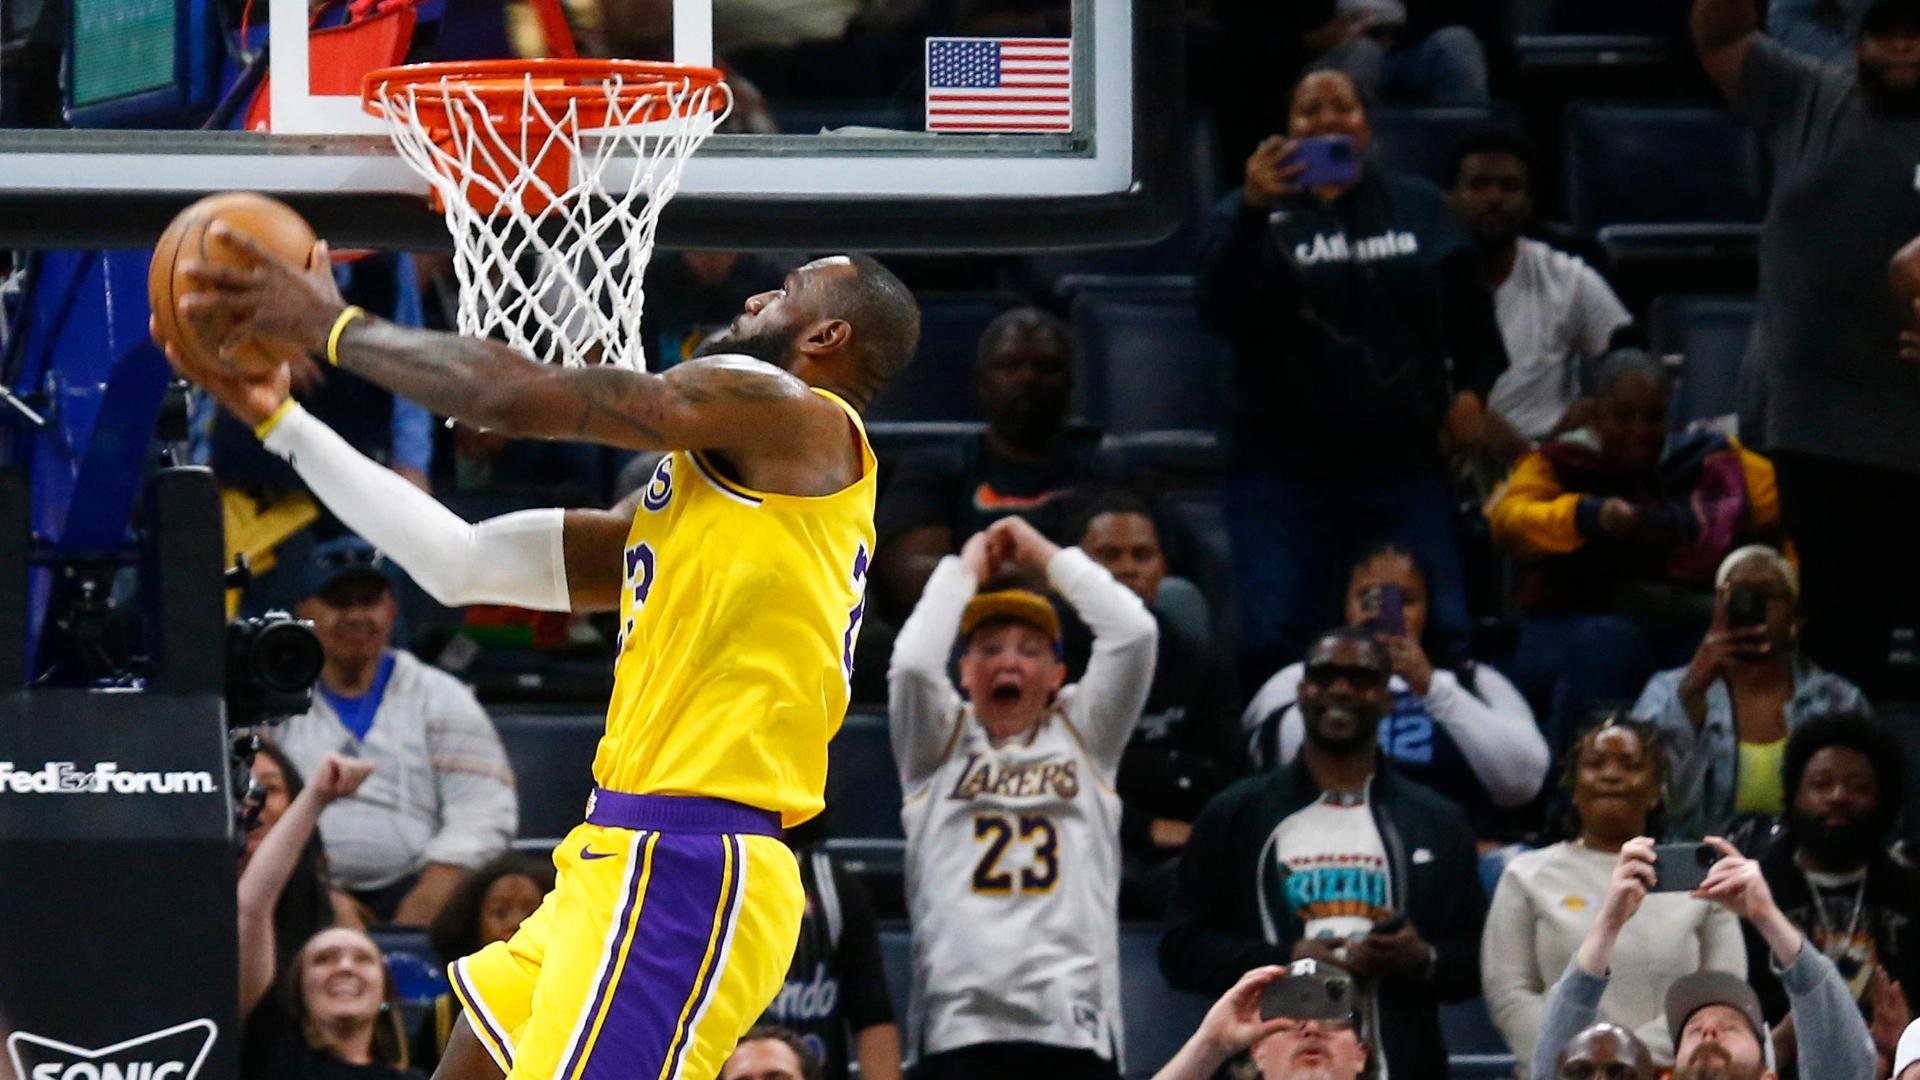 LeBron seals game for Lakers with showtime slam